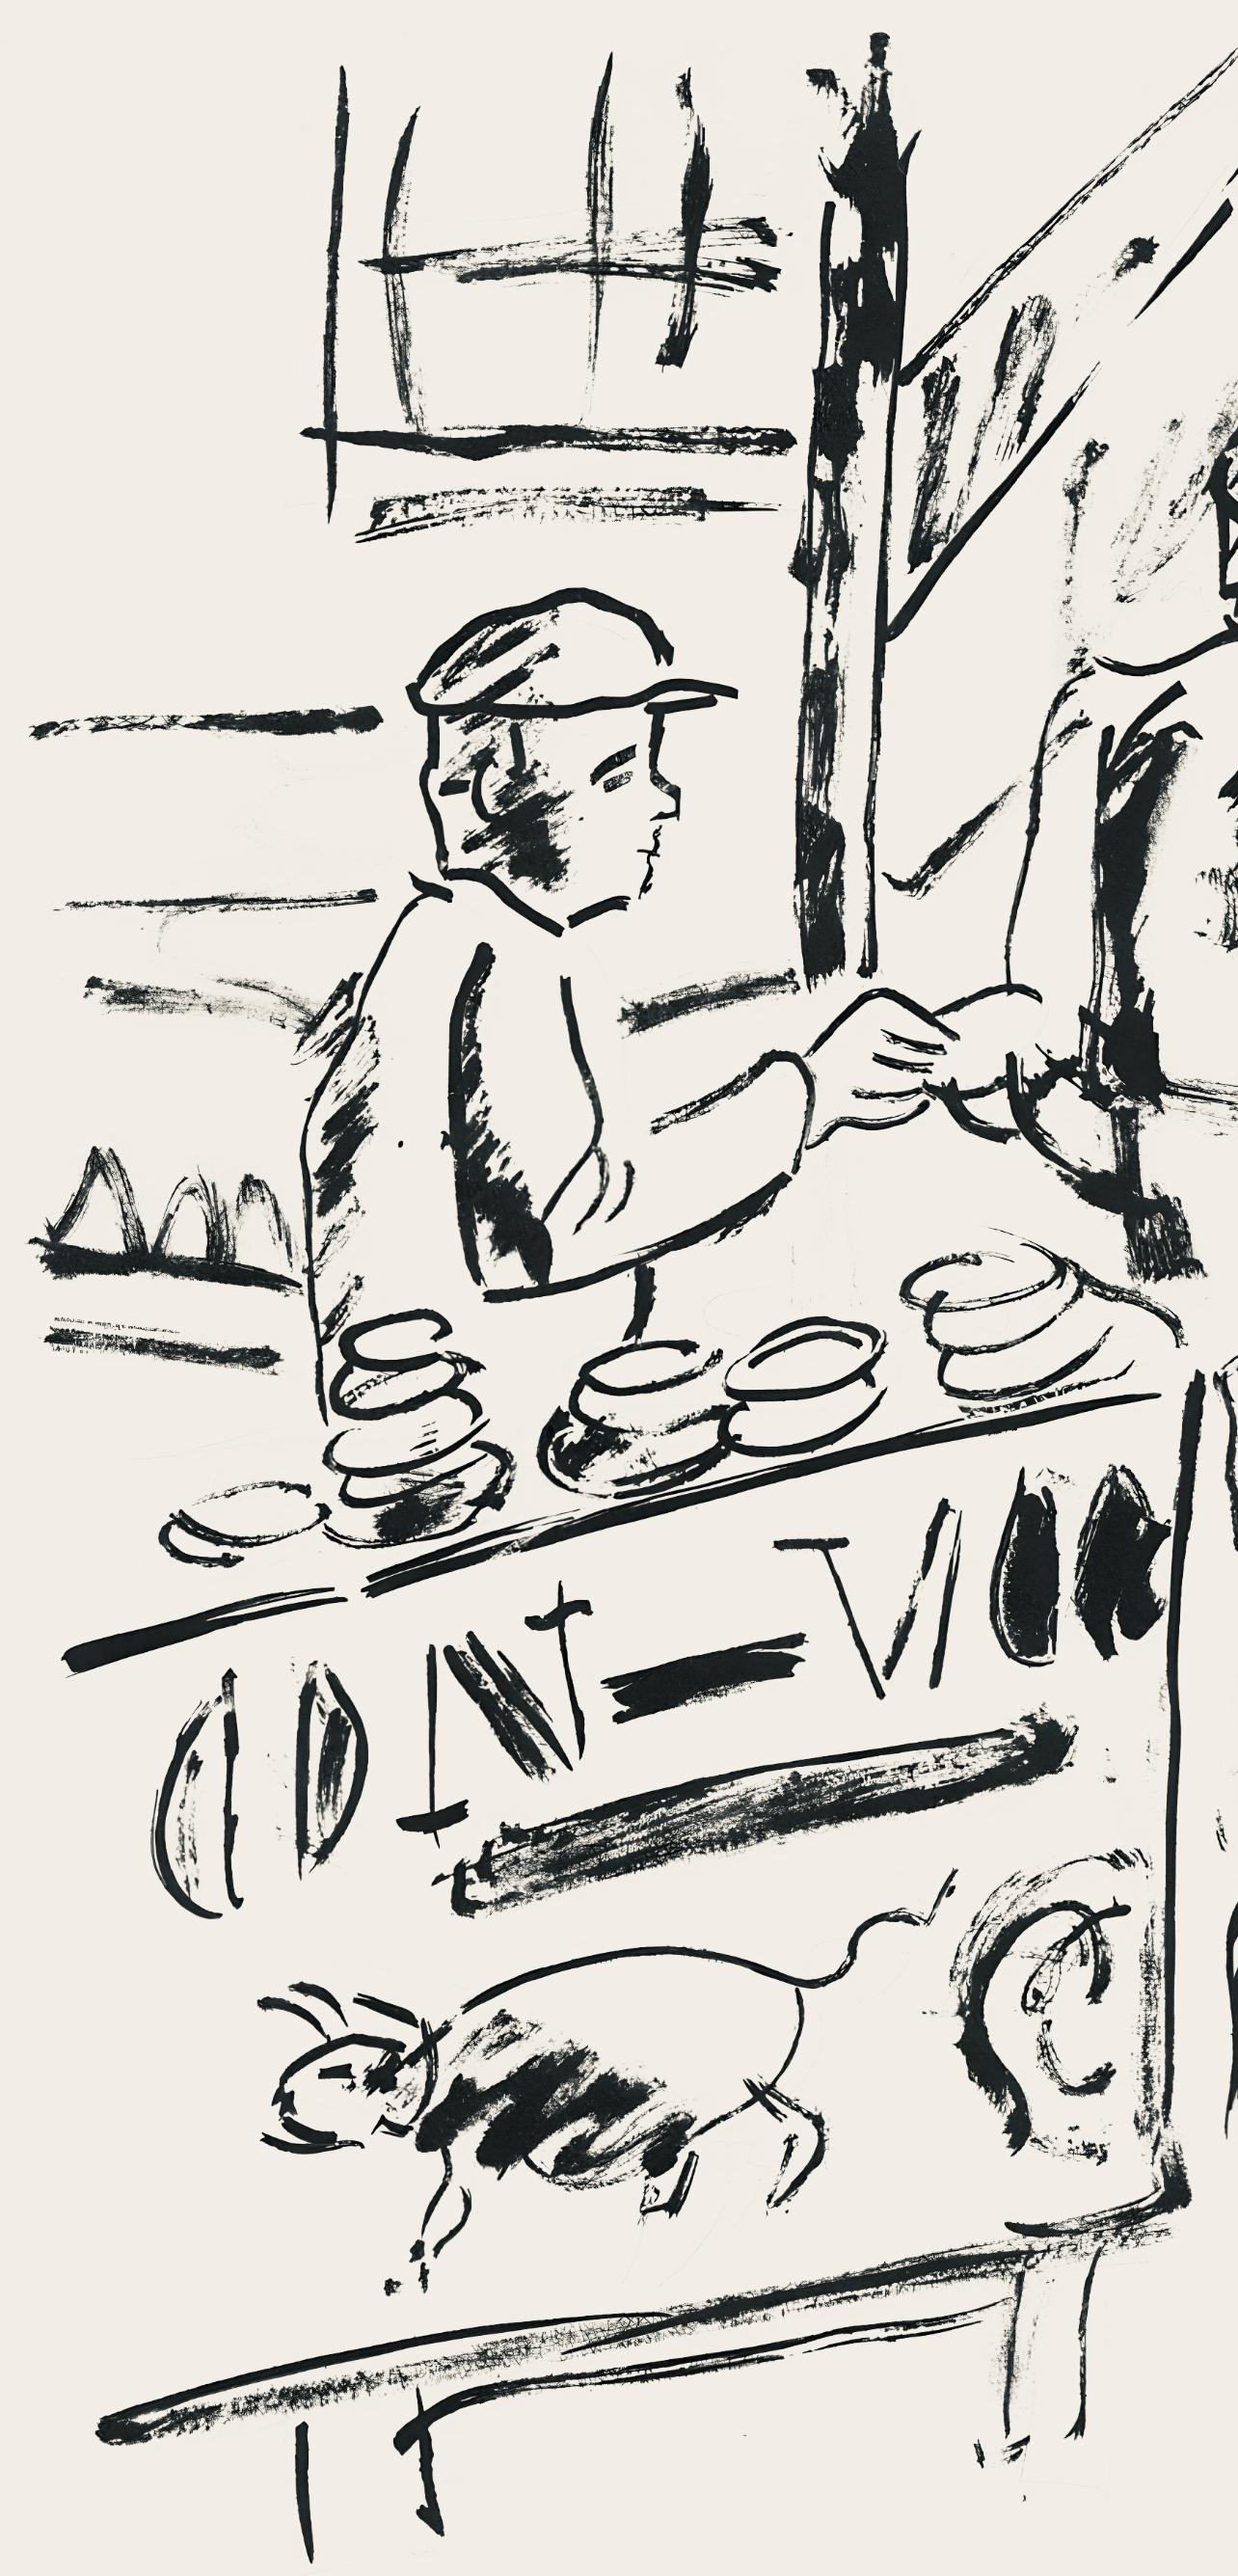 Léger, Composition, mes voyages (after) - Print by Fernand Léger